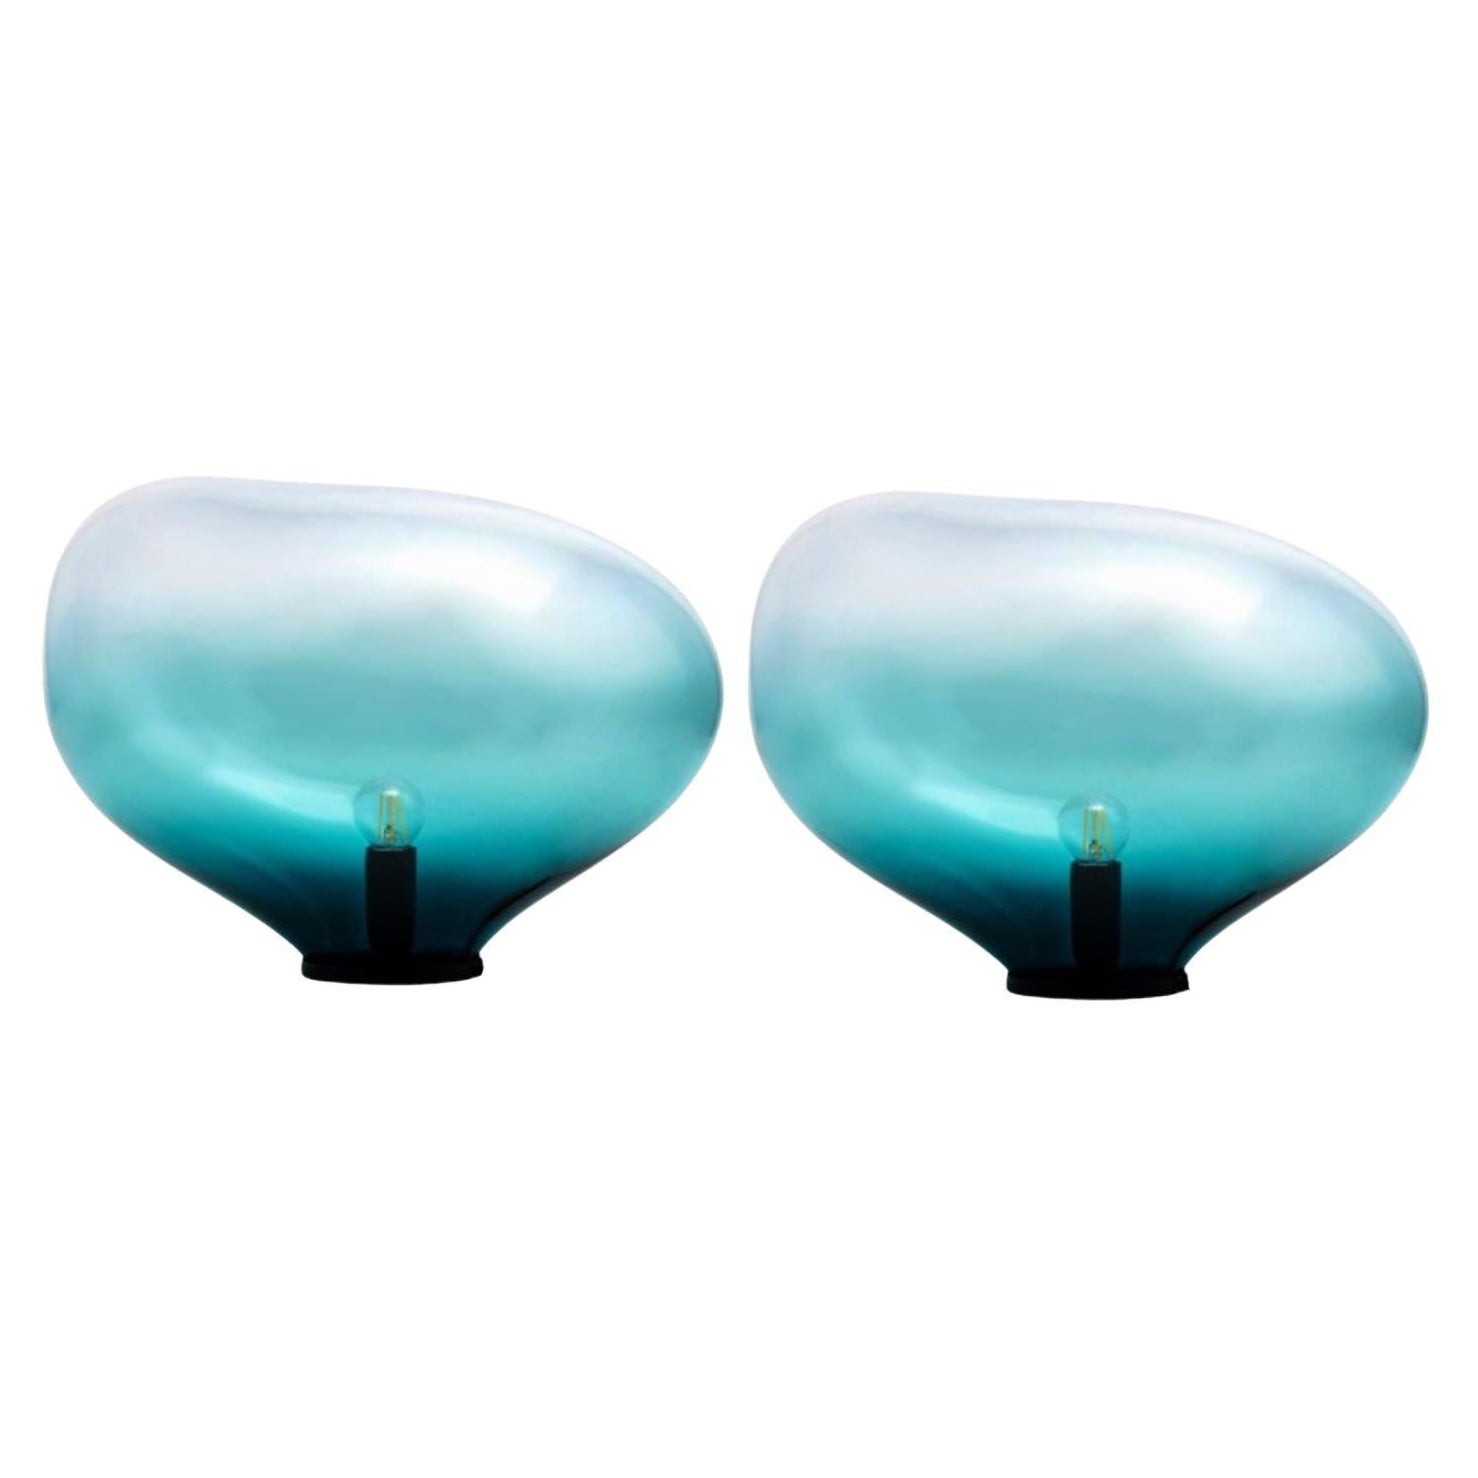 Set of 2 Sedna Petrol M Table Lamps by Eloa For Sale